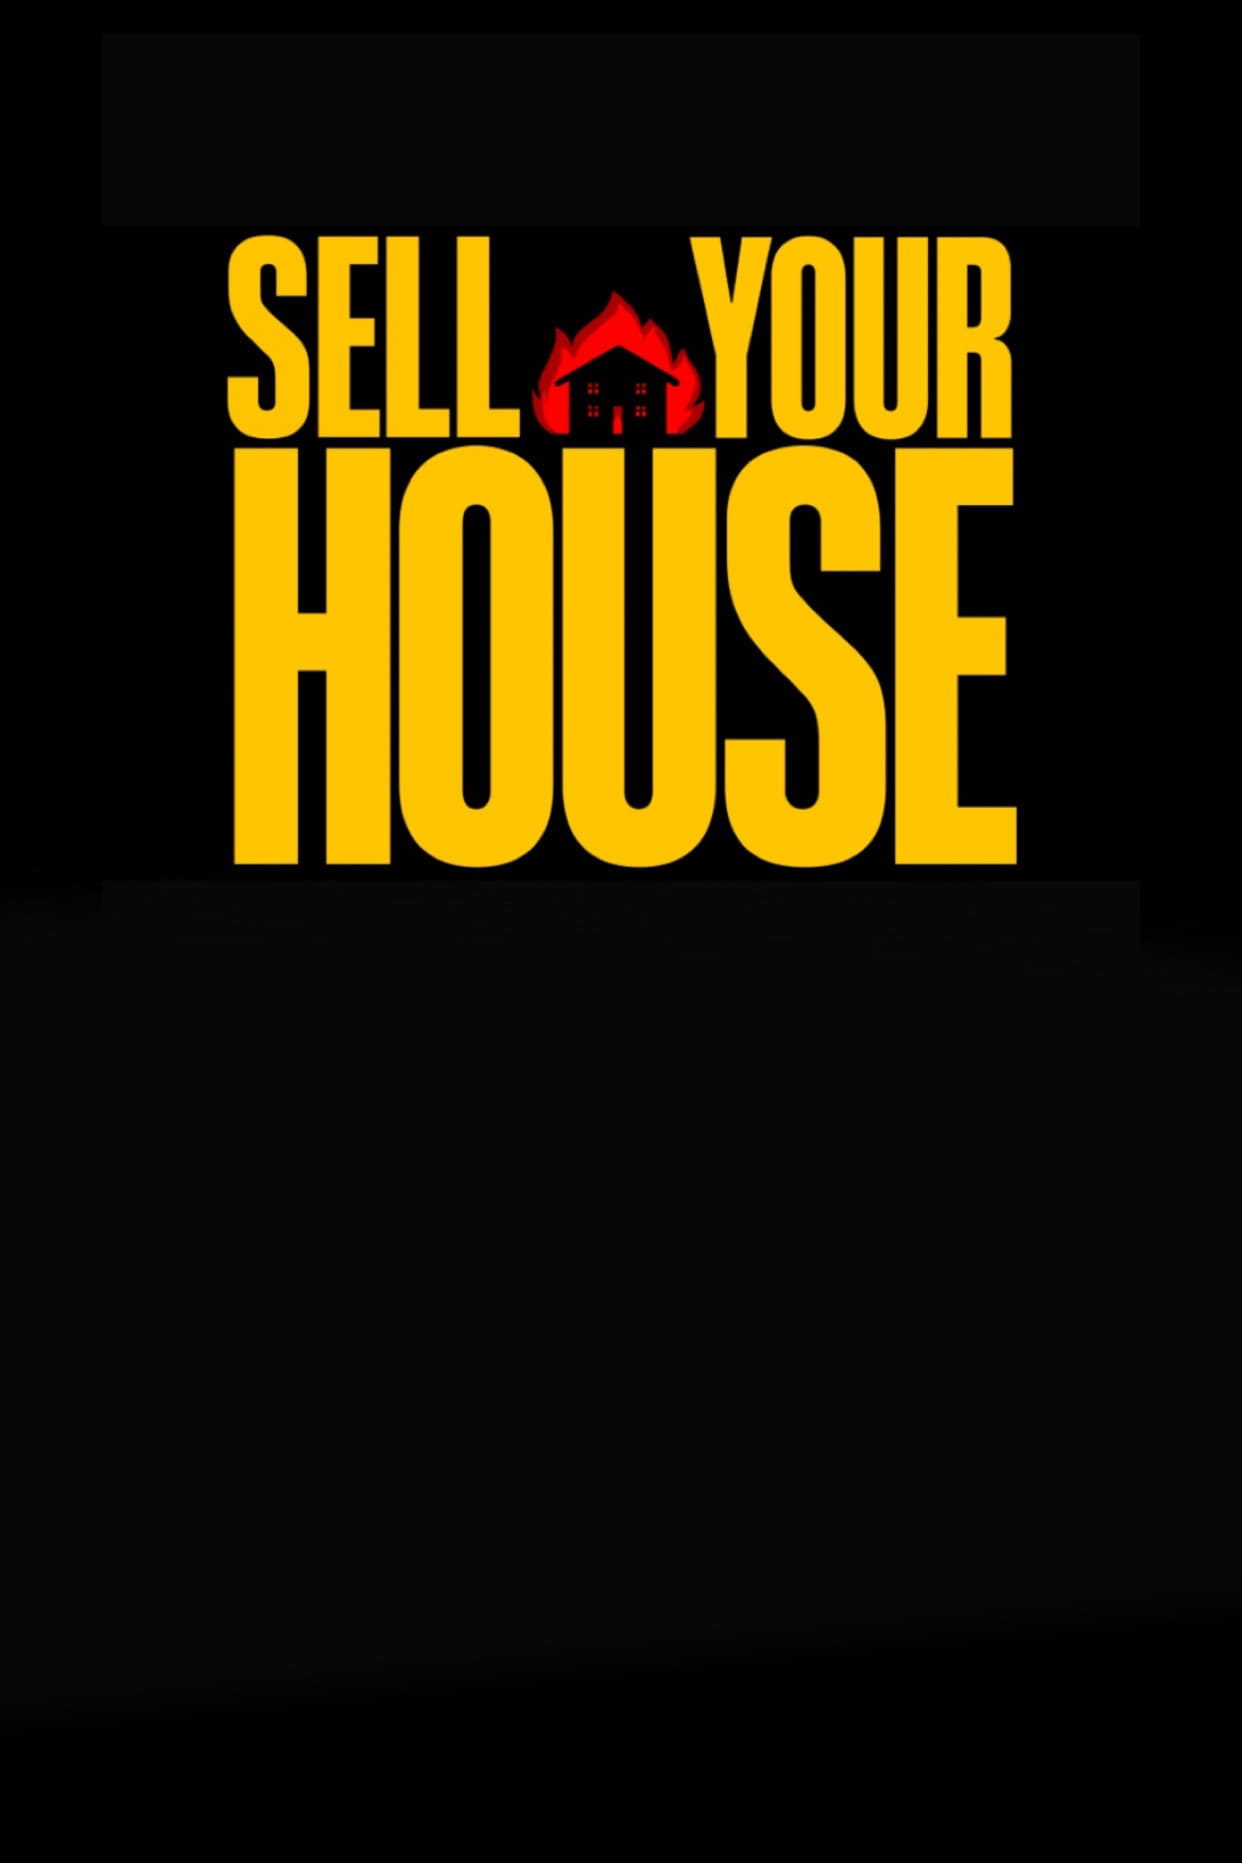 Sell Your House film